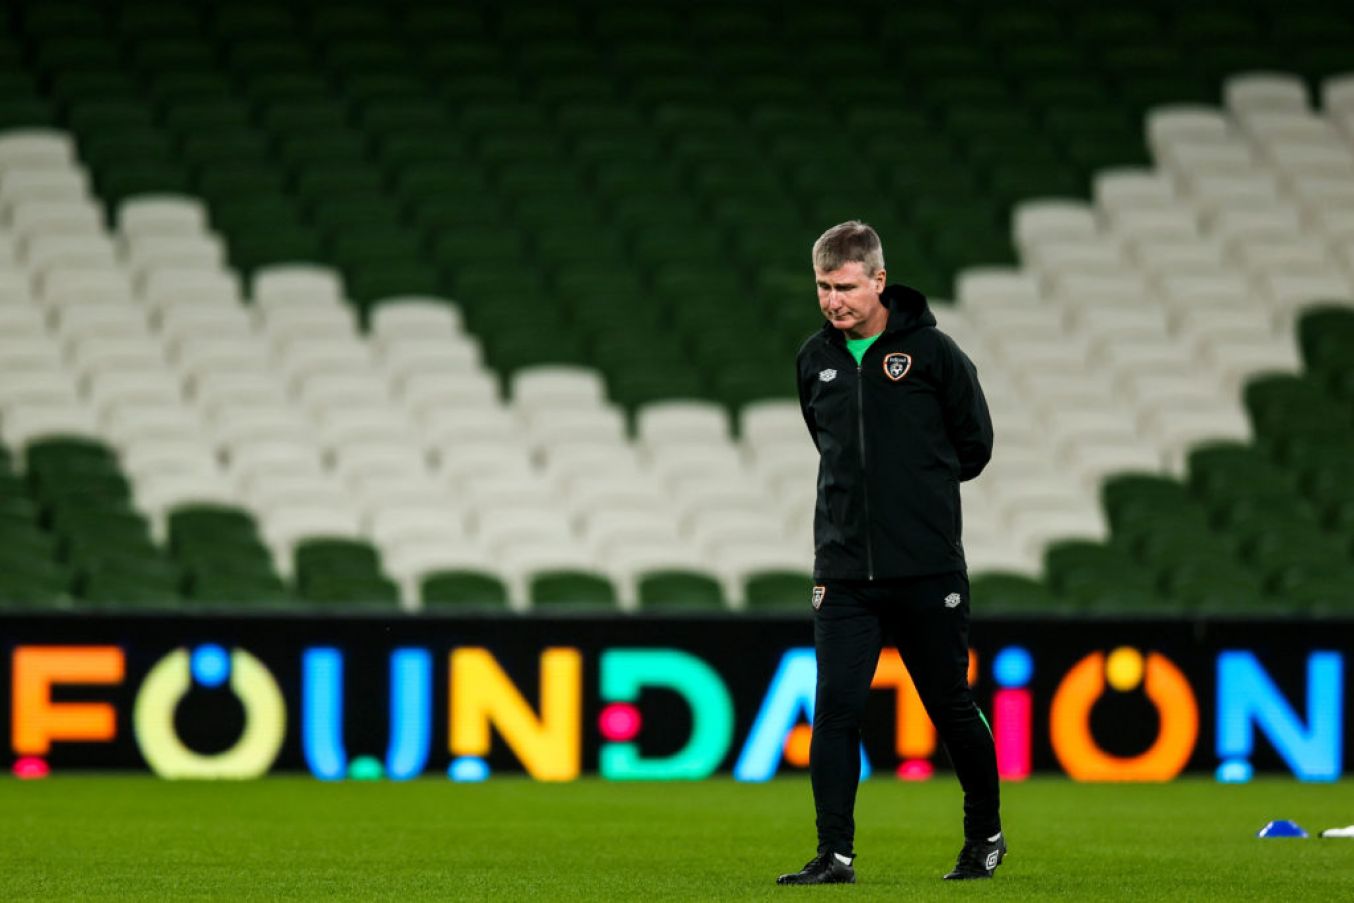 Republic Of Ireland
Manager Stephen Kenny Faced Significant Criticism This Year After His Team Went 11 Games Without A Victory - A Barren Spell Which Ended With A 4-1 Win Over Andorra In June.
©Inpho/Ben Brady